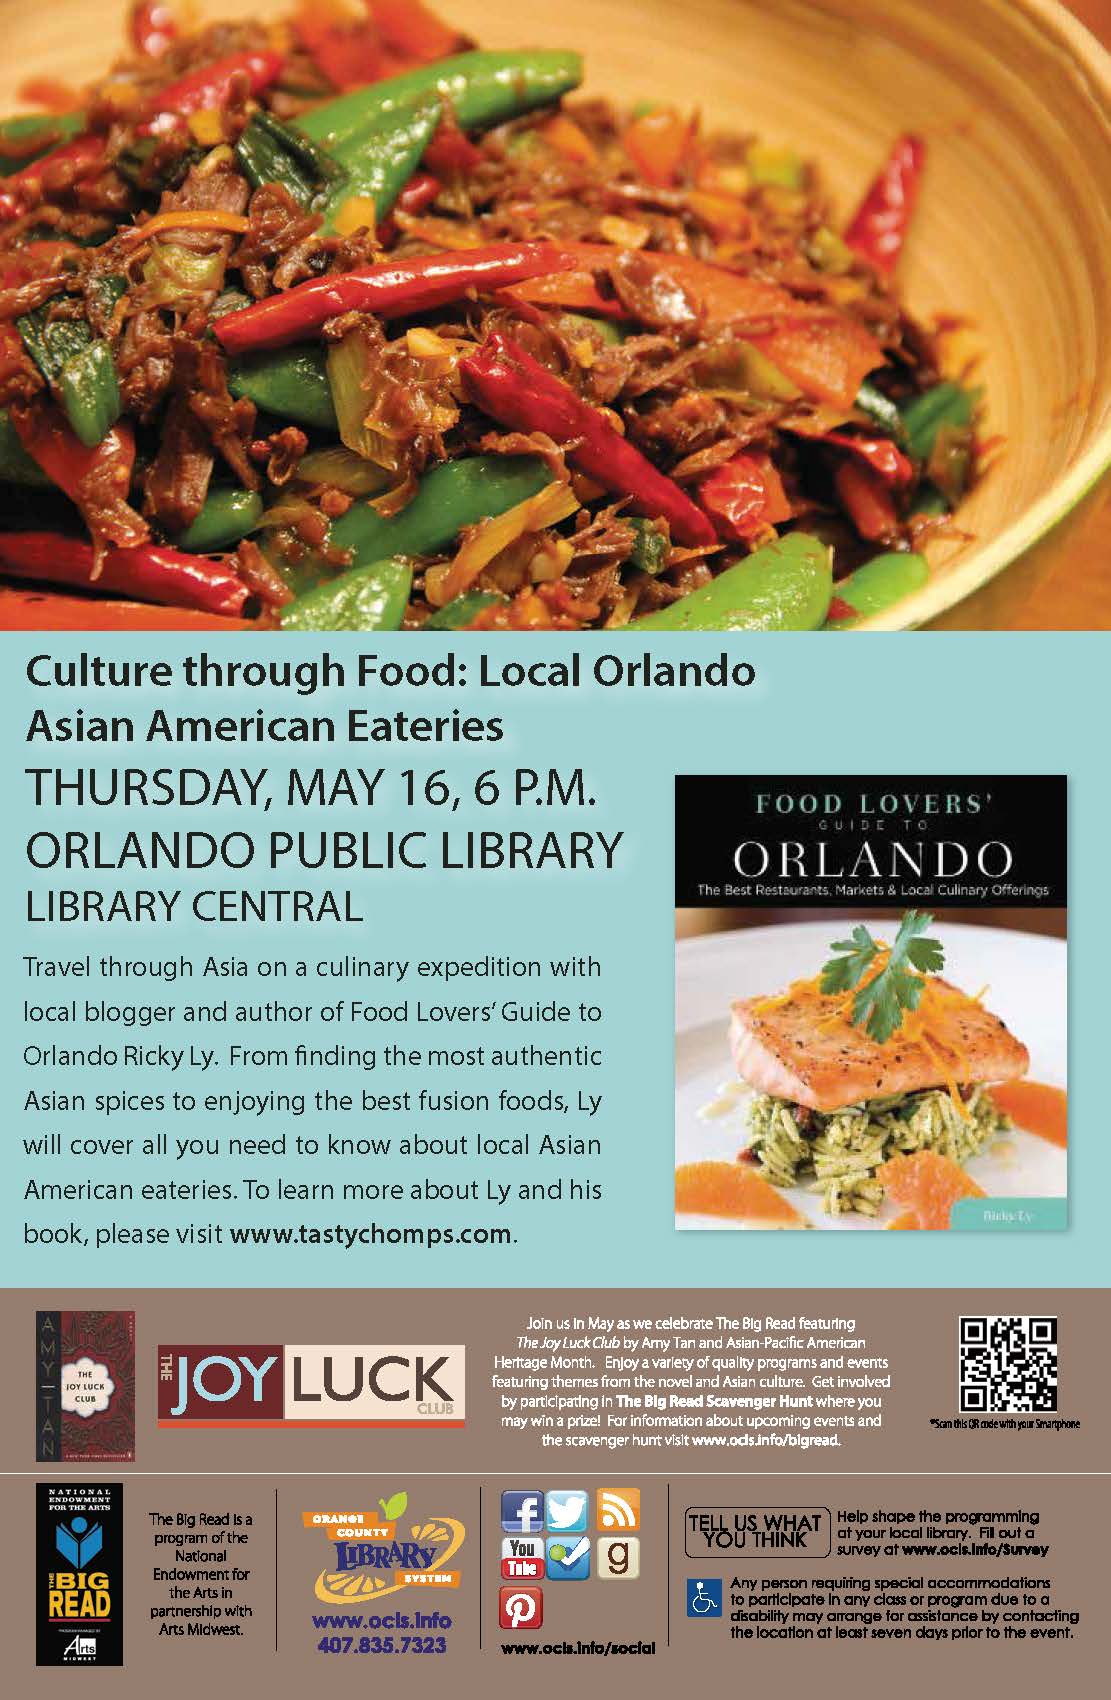 Culture Through Food: Local Orlando Asian American Eateries at the Downtown Orlando Library